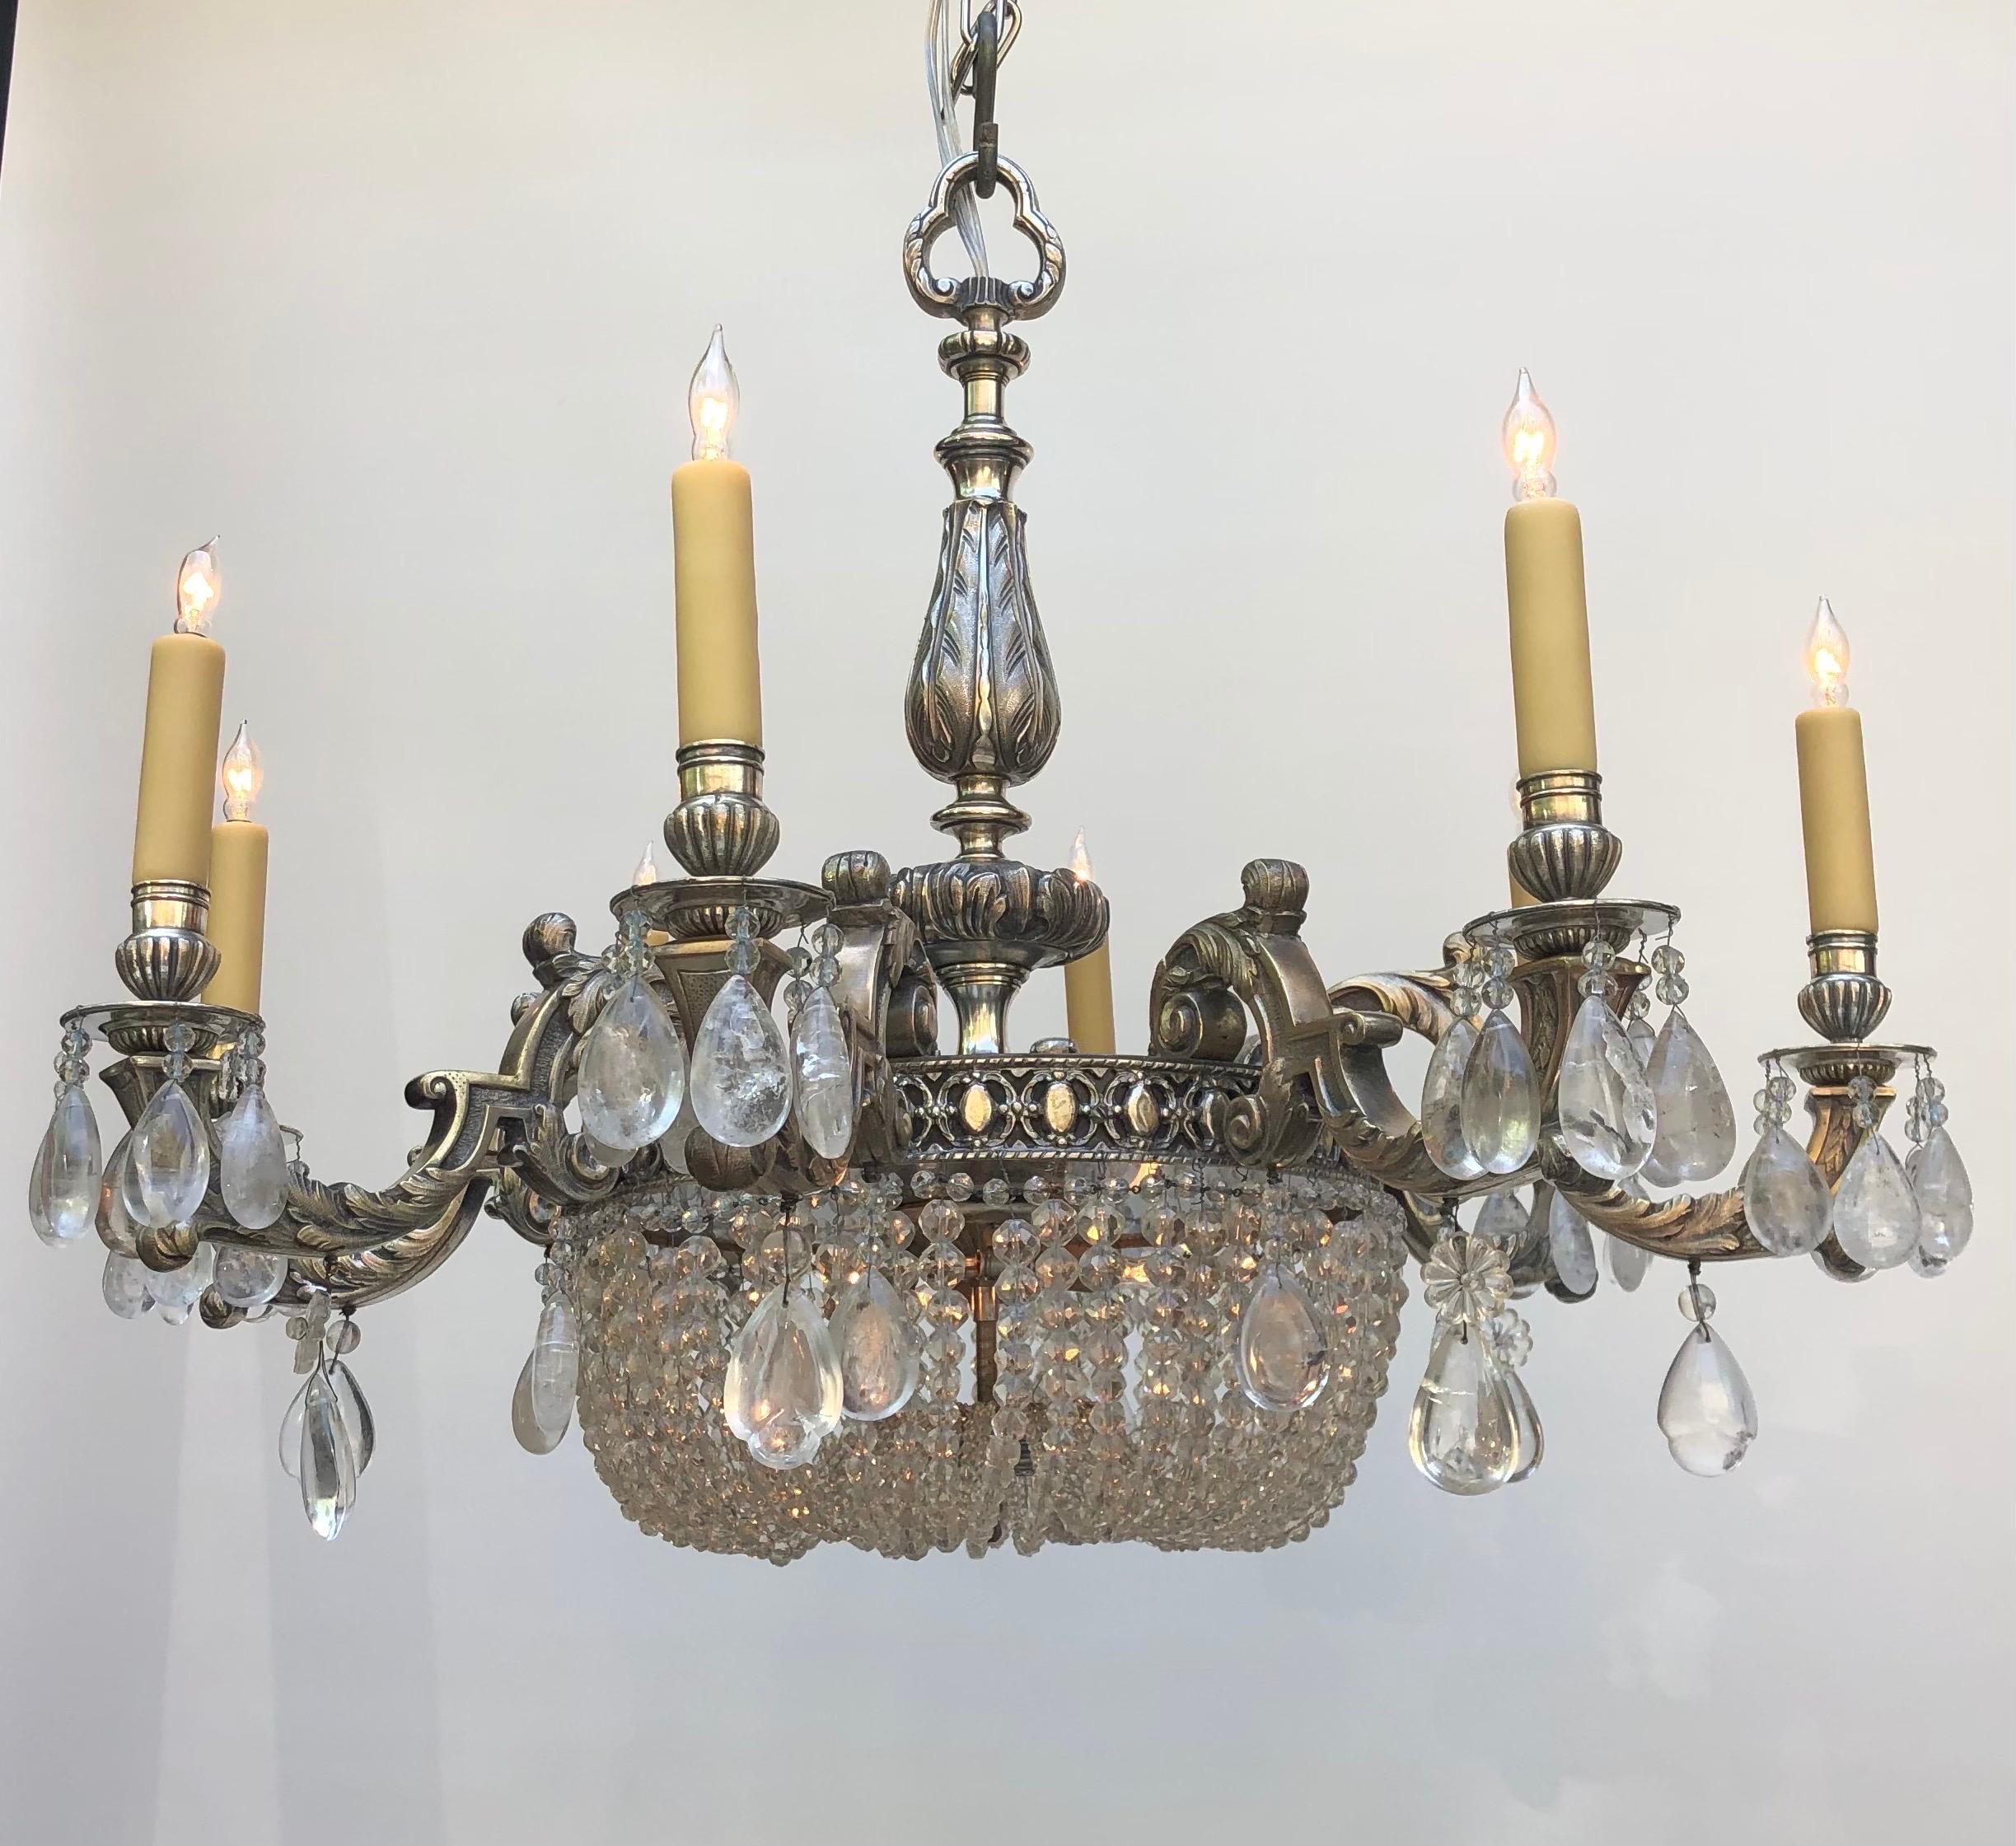 French Belle Époque Rock Crystal Silver-Plated Bronze Chandelier, Early 20th Century For Sale